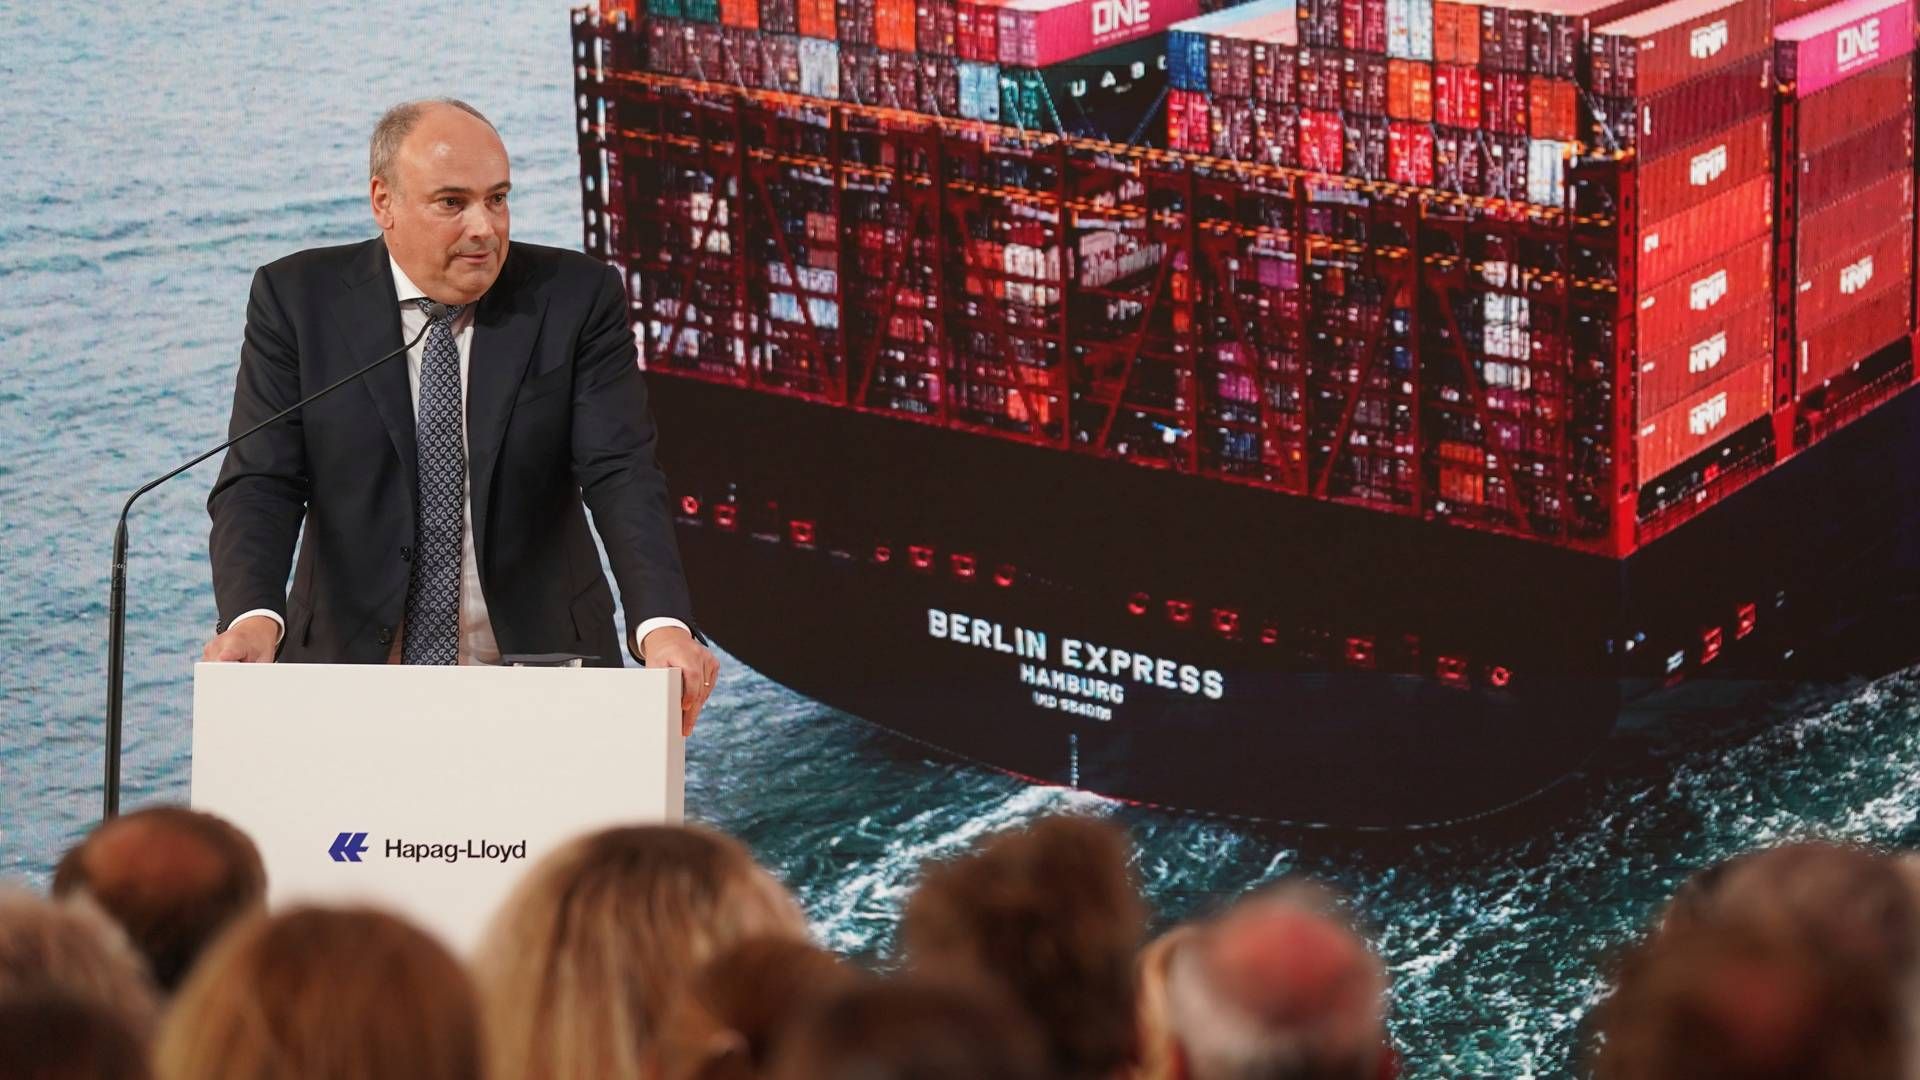 "We might have a slightly earlier peak season because of the longer transit times that we're seeing at the moment and with all the uncertainty, people might try to get cargo a bit earlier," says Hapag-Lloyd CEO Rolf Habben Jansen. | Photo: Marcus Brandt/AP/Ritzau Scanpix